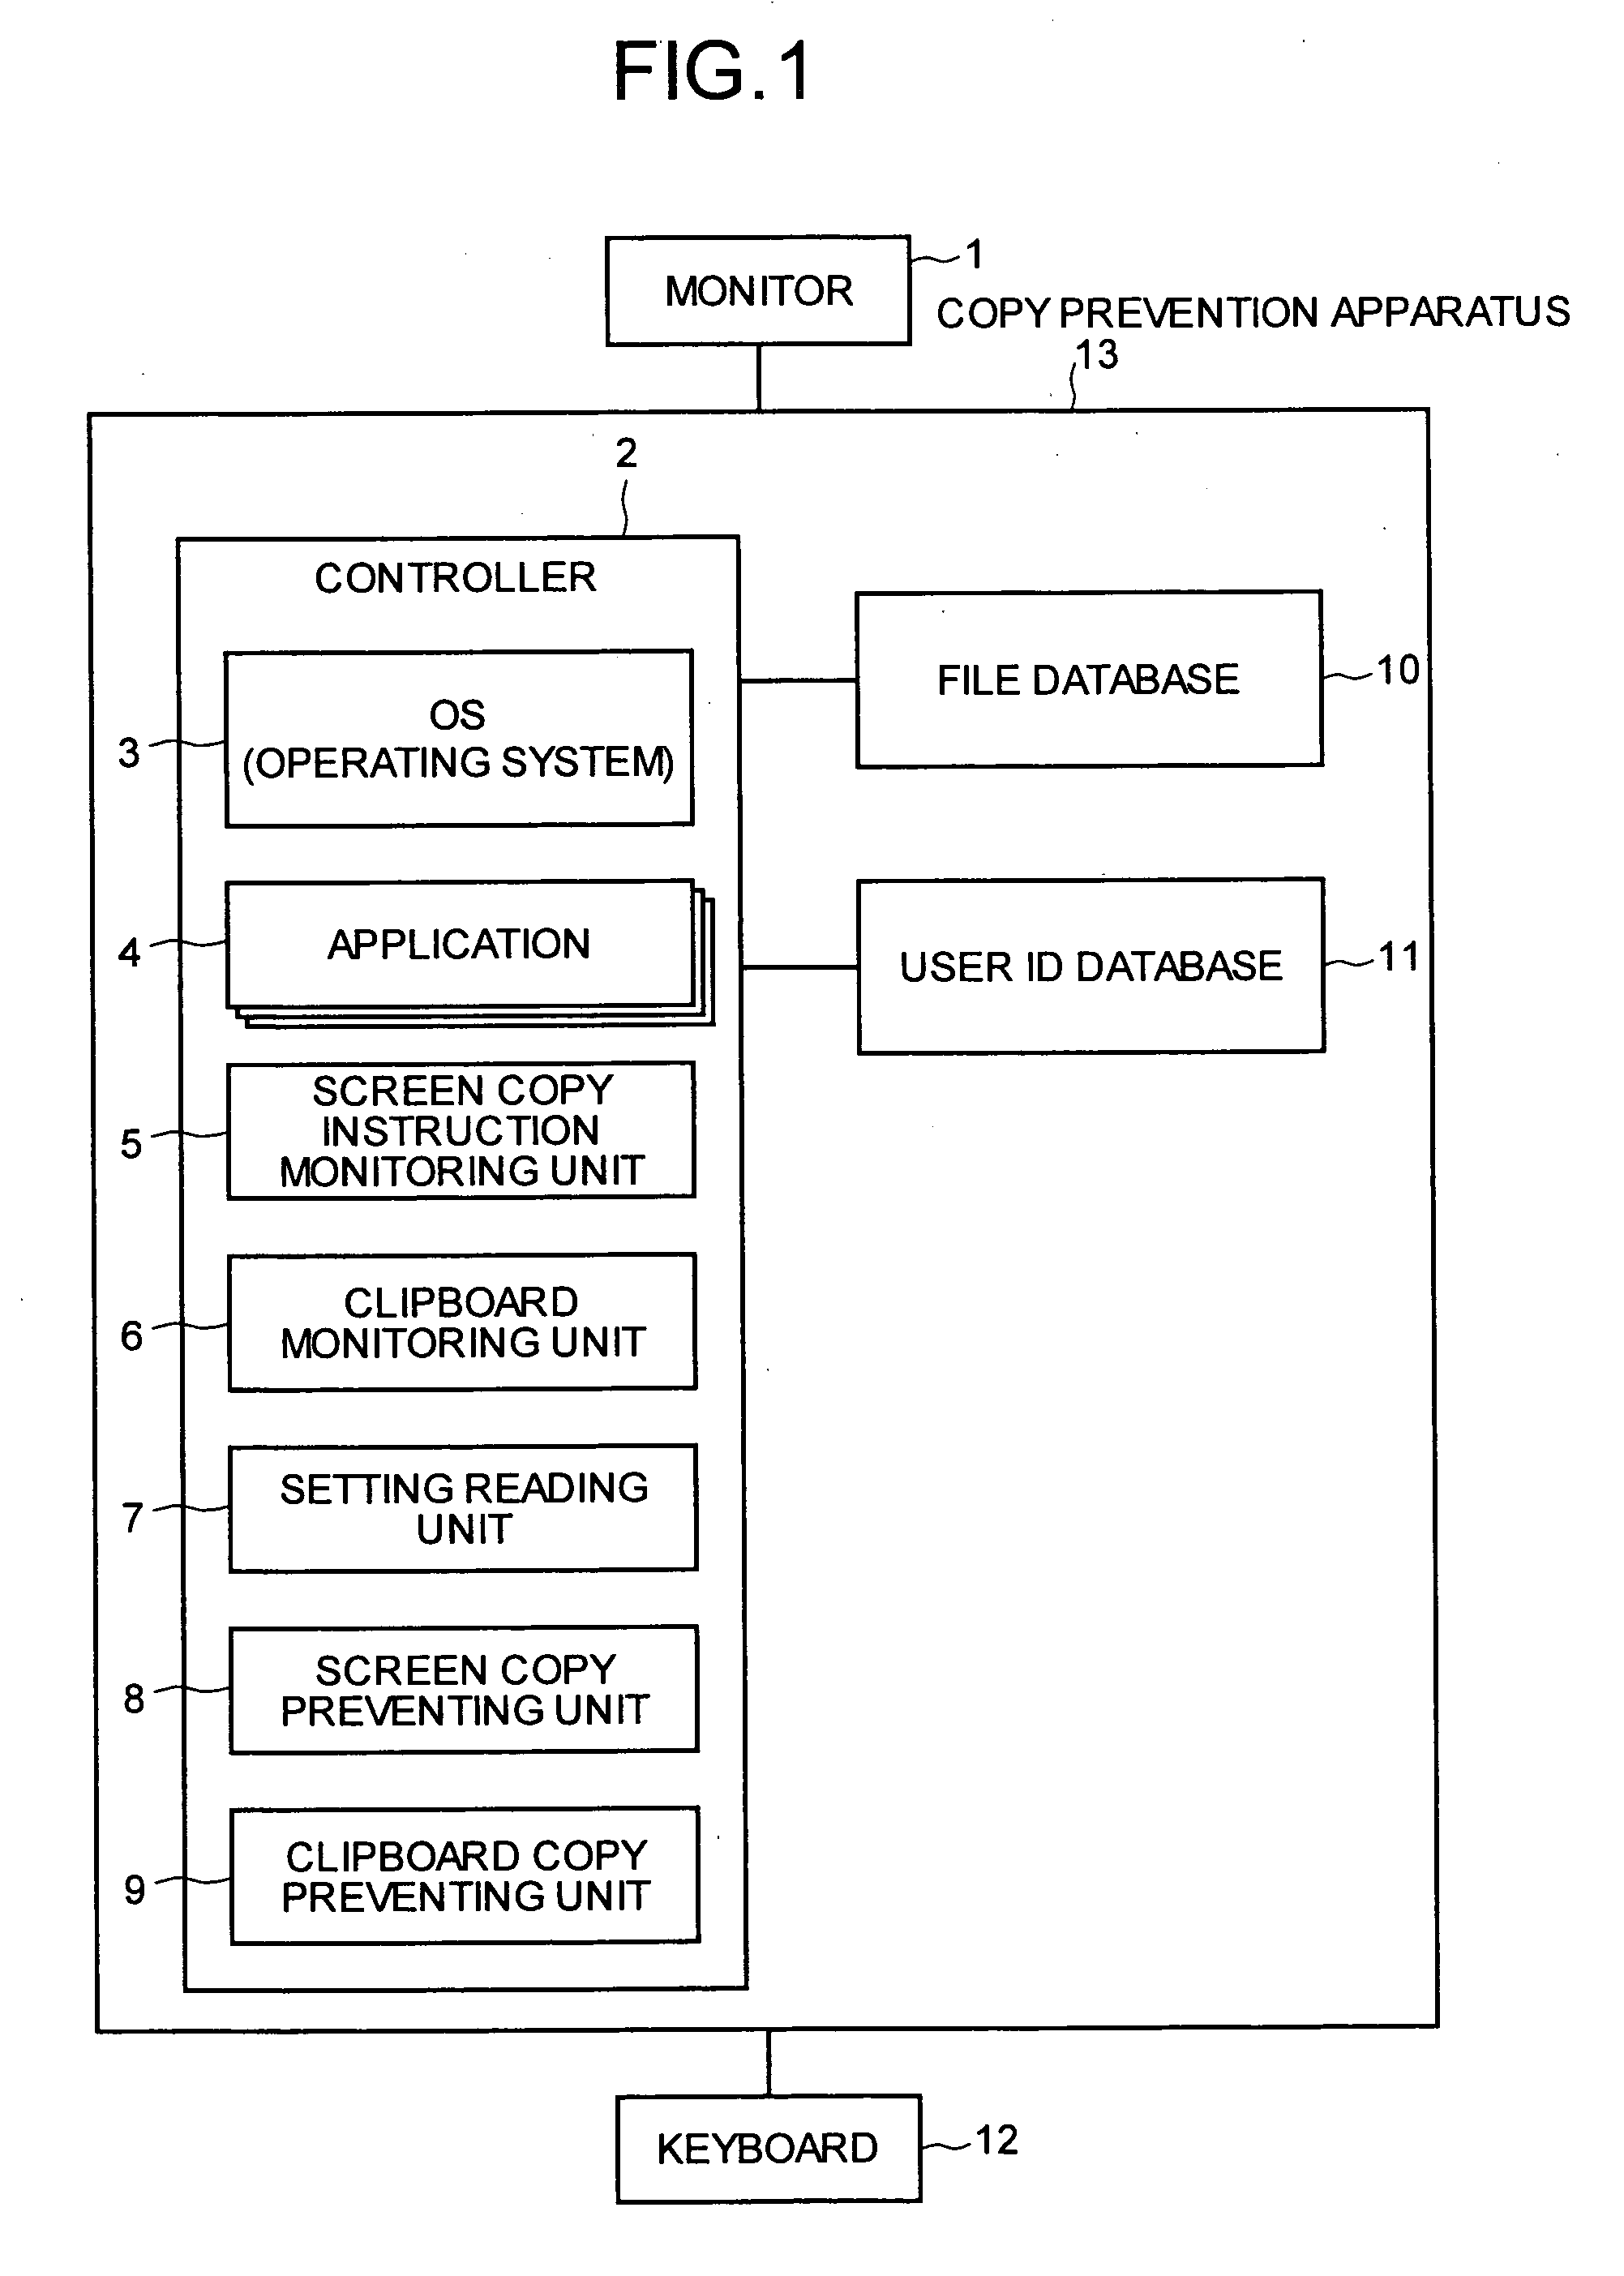 Apparatus, method and computer product for preventing copy of data